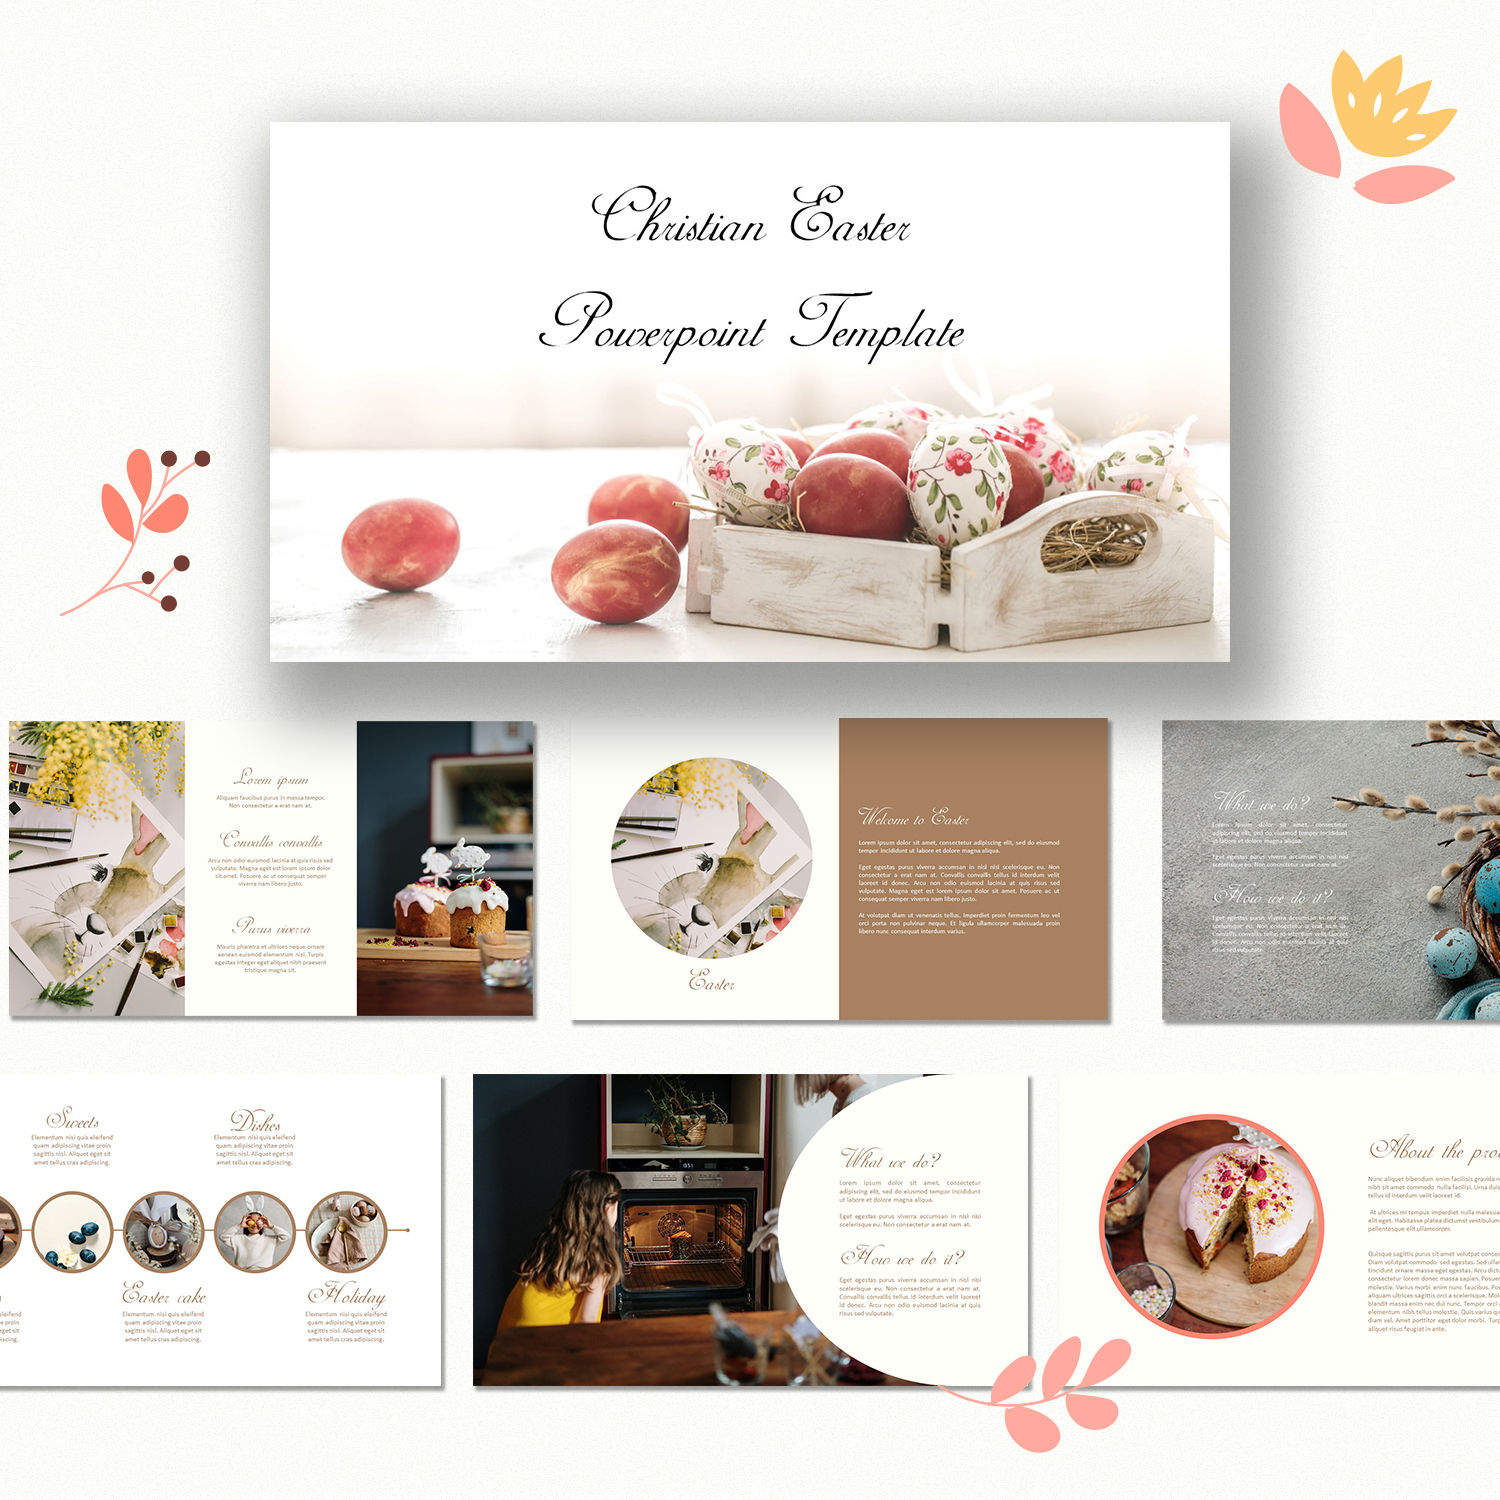 A selection of gorgeous images from a christian easter powerpoint template.